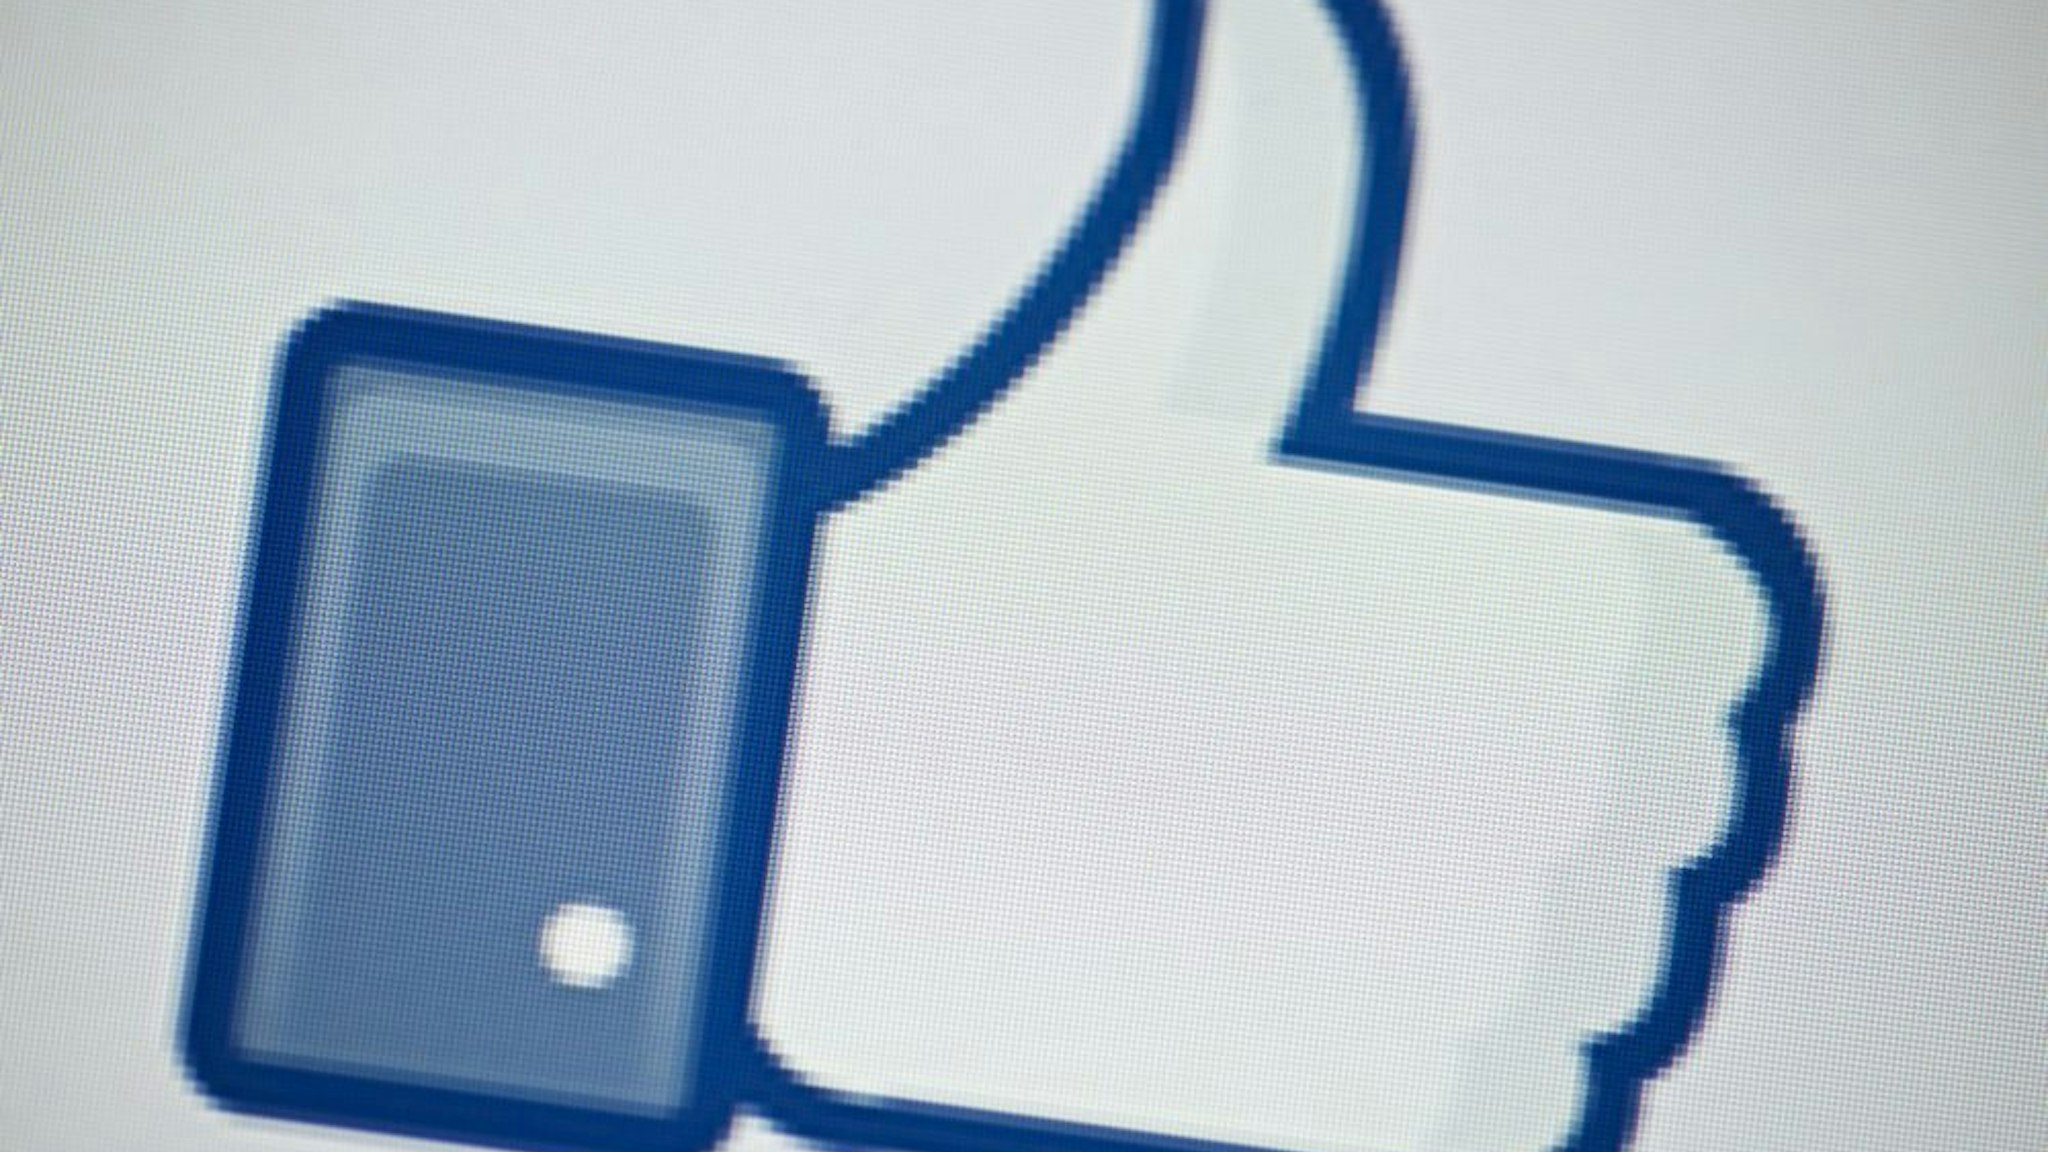 A view of Facebook's "Like" button May 10, 2012 in Washington, DC. Social-networking giant Facebook will go public on the NASDAQ May 18 with its initial public offering, trading under the symbol FB, in an effort to raise $10.6 billion.